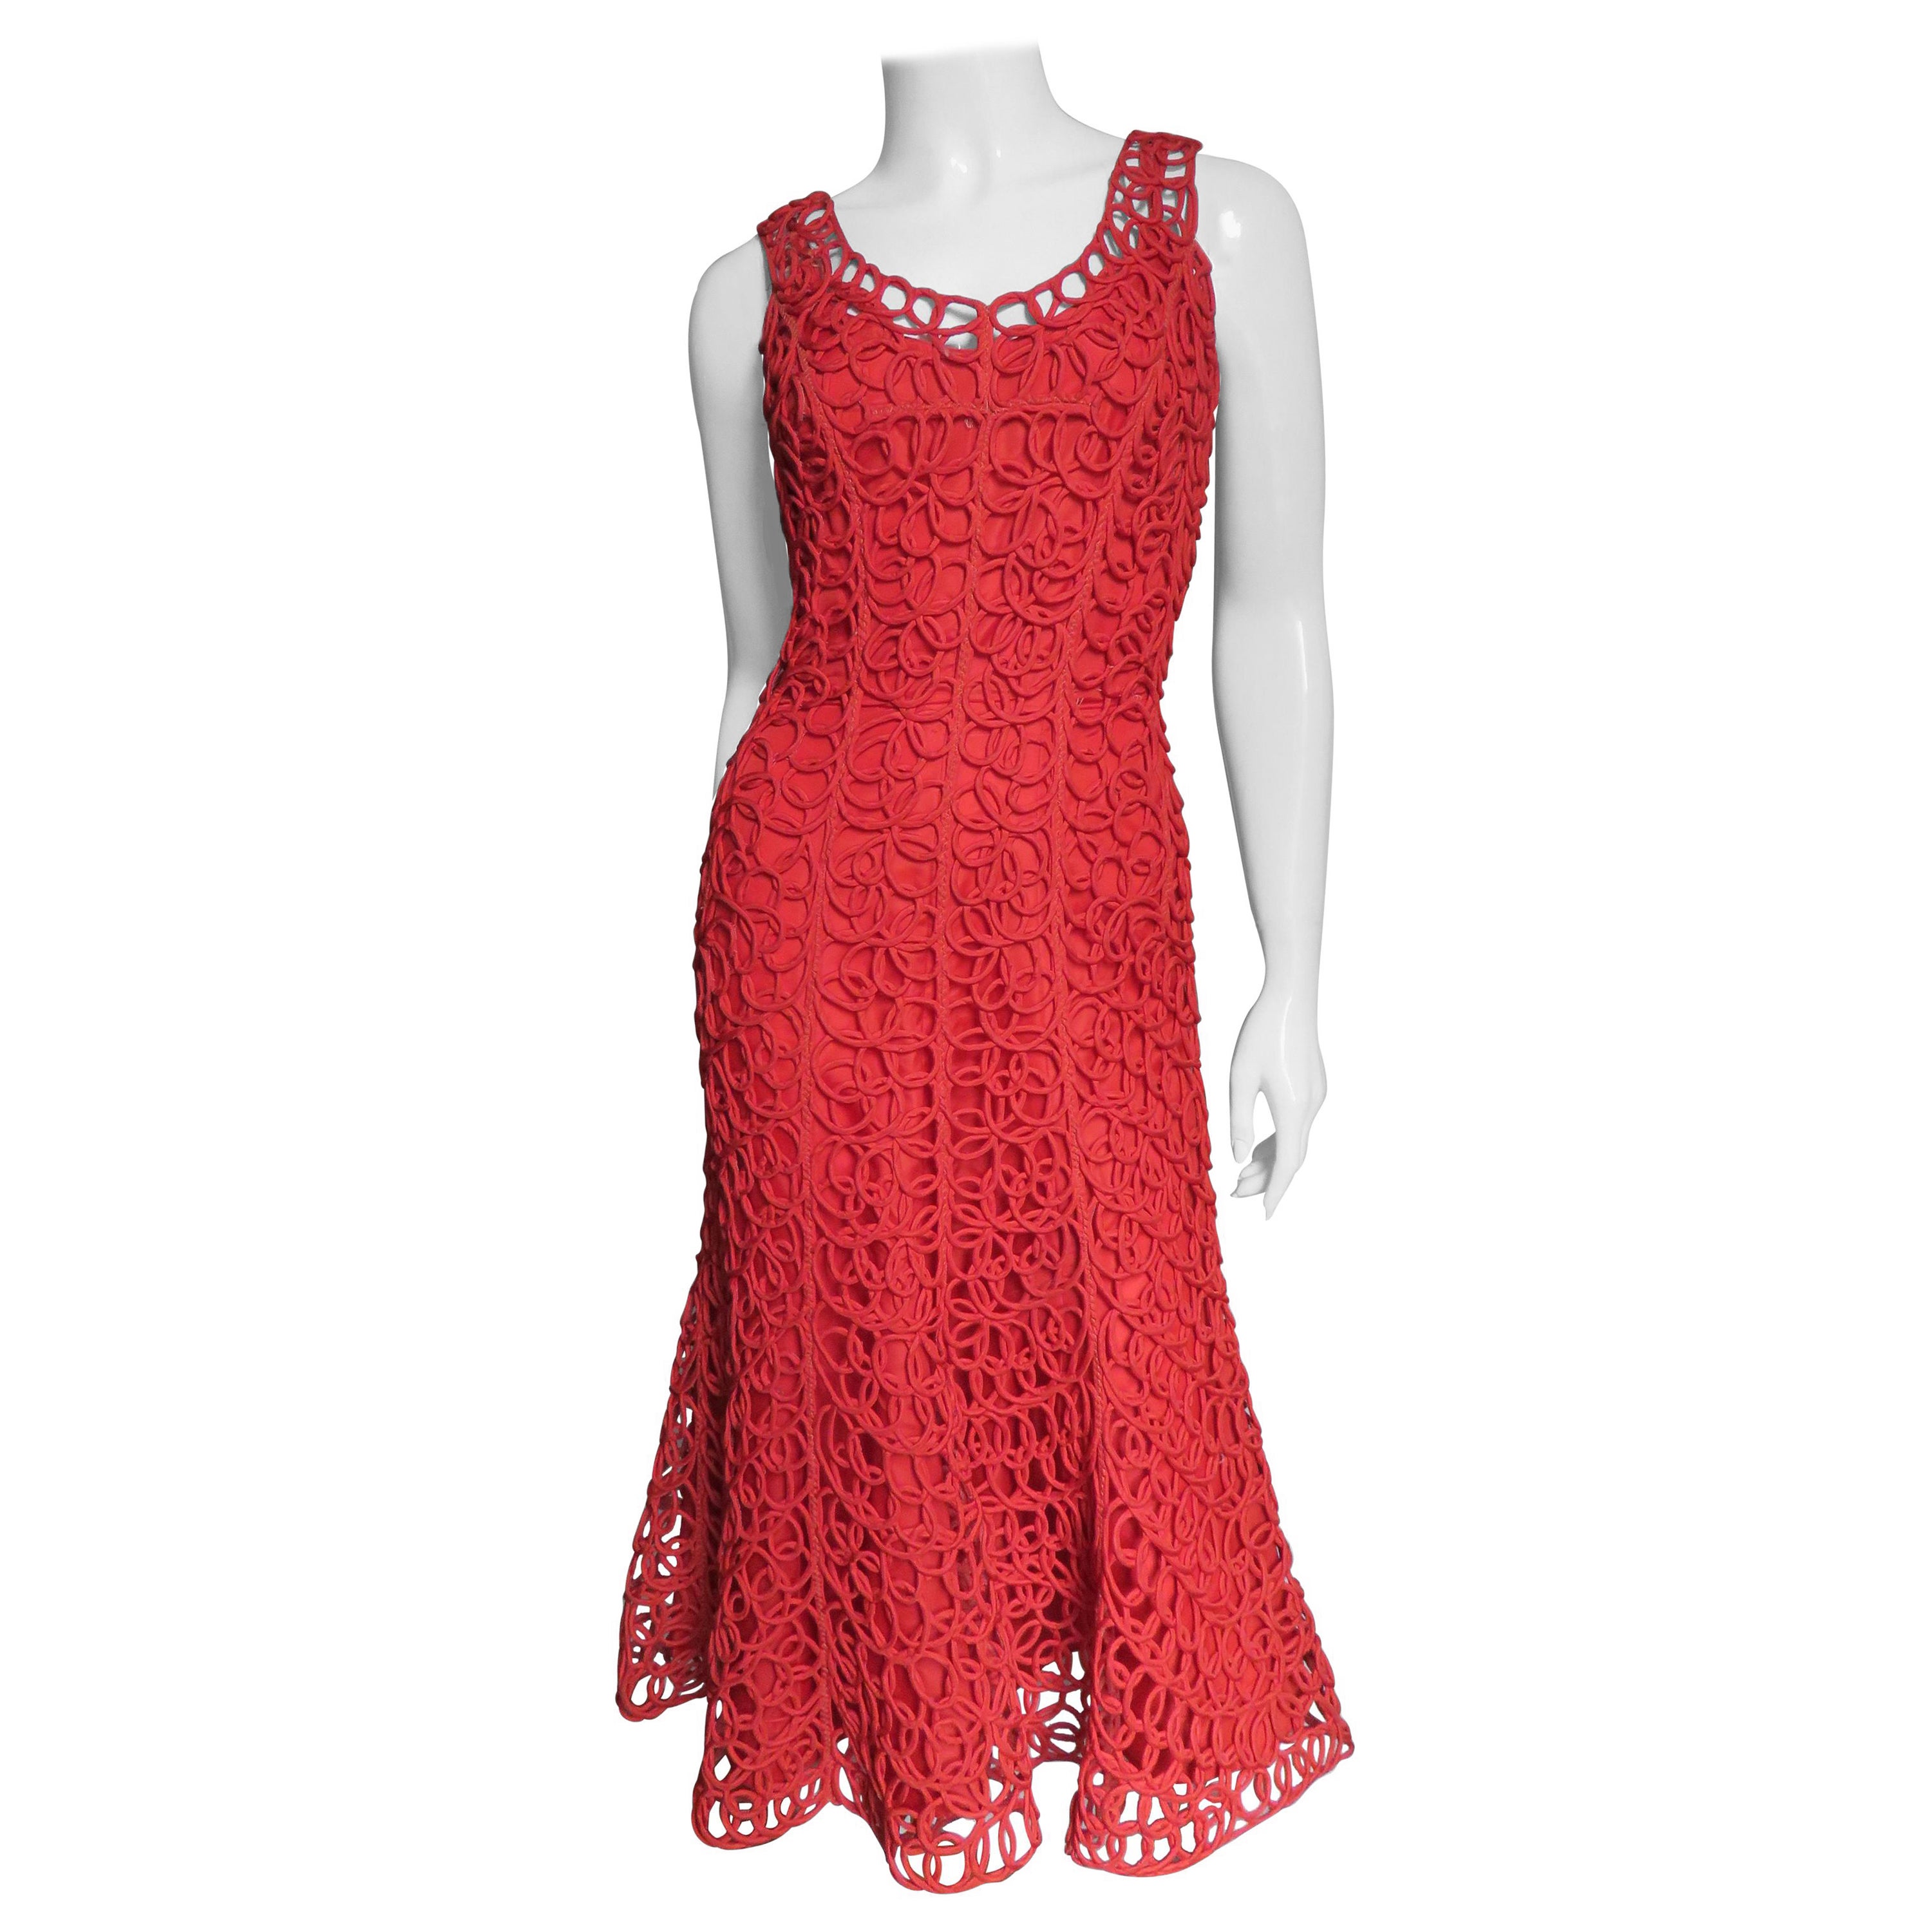  1950s Coil Piped Dress 